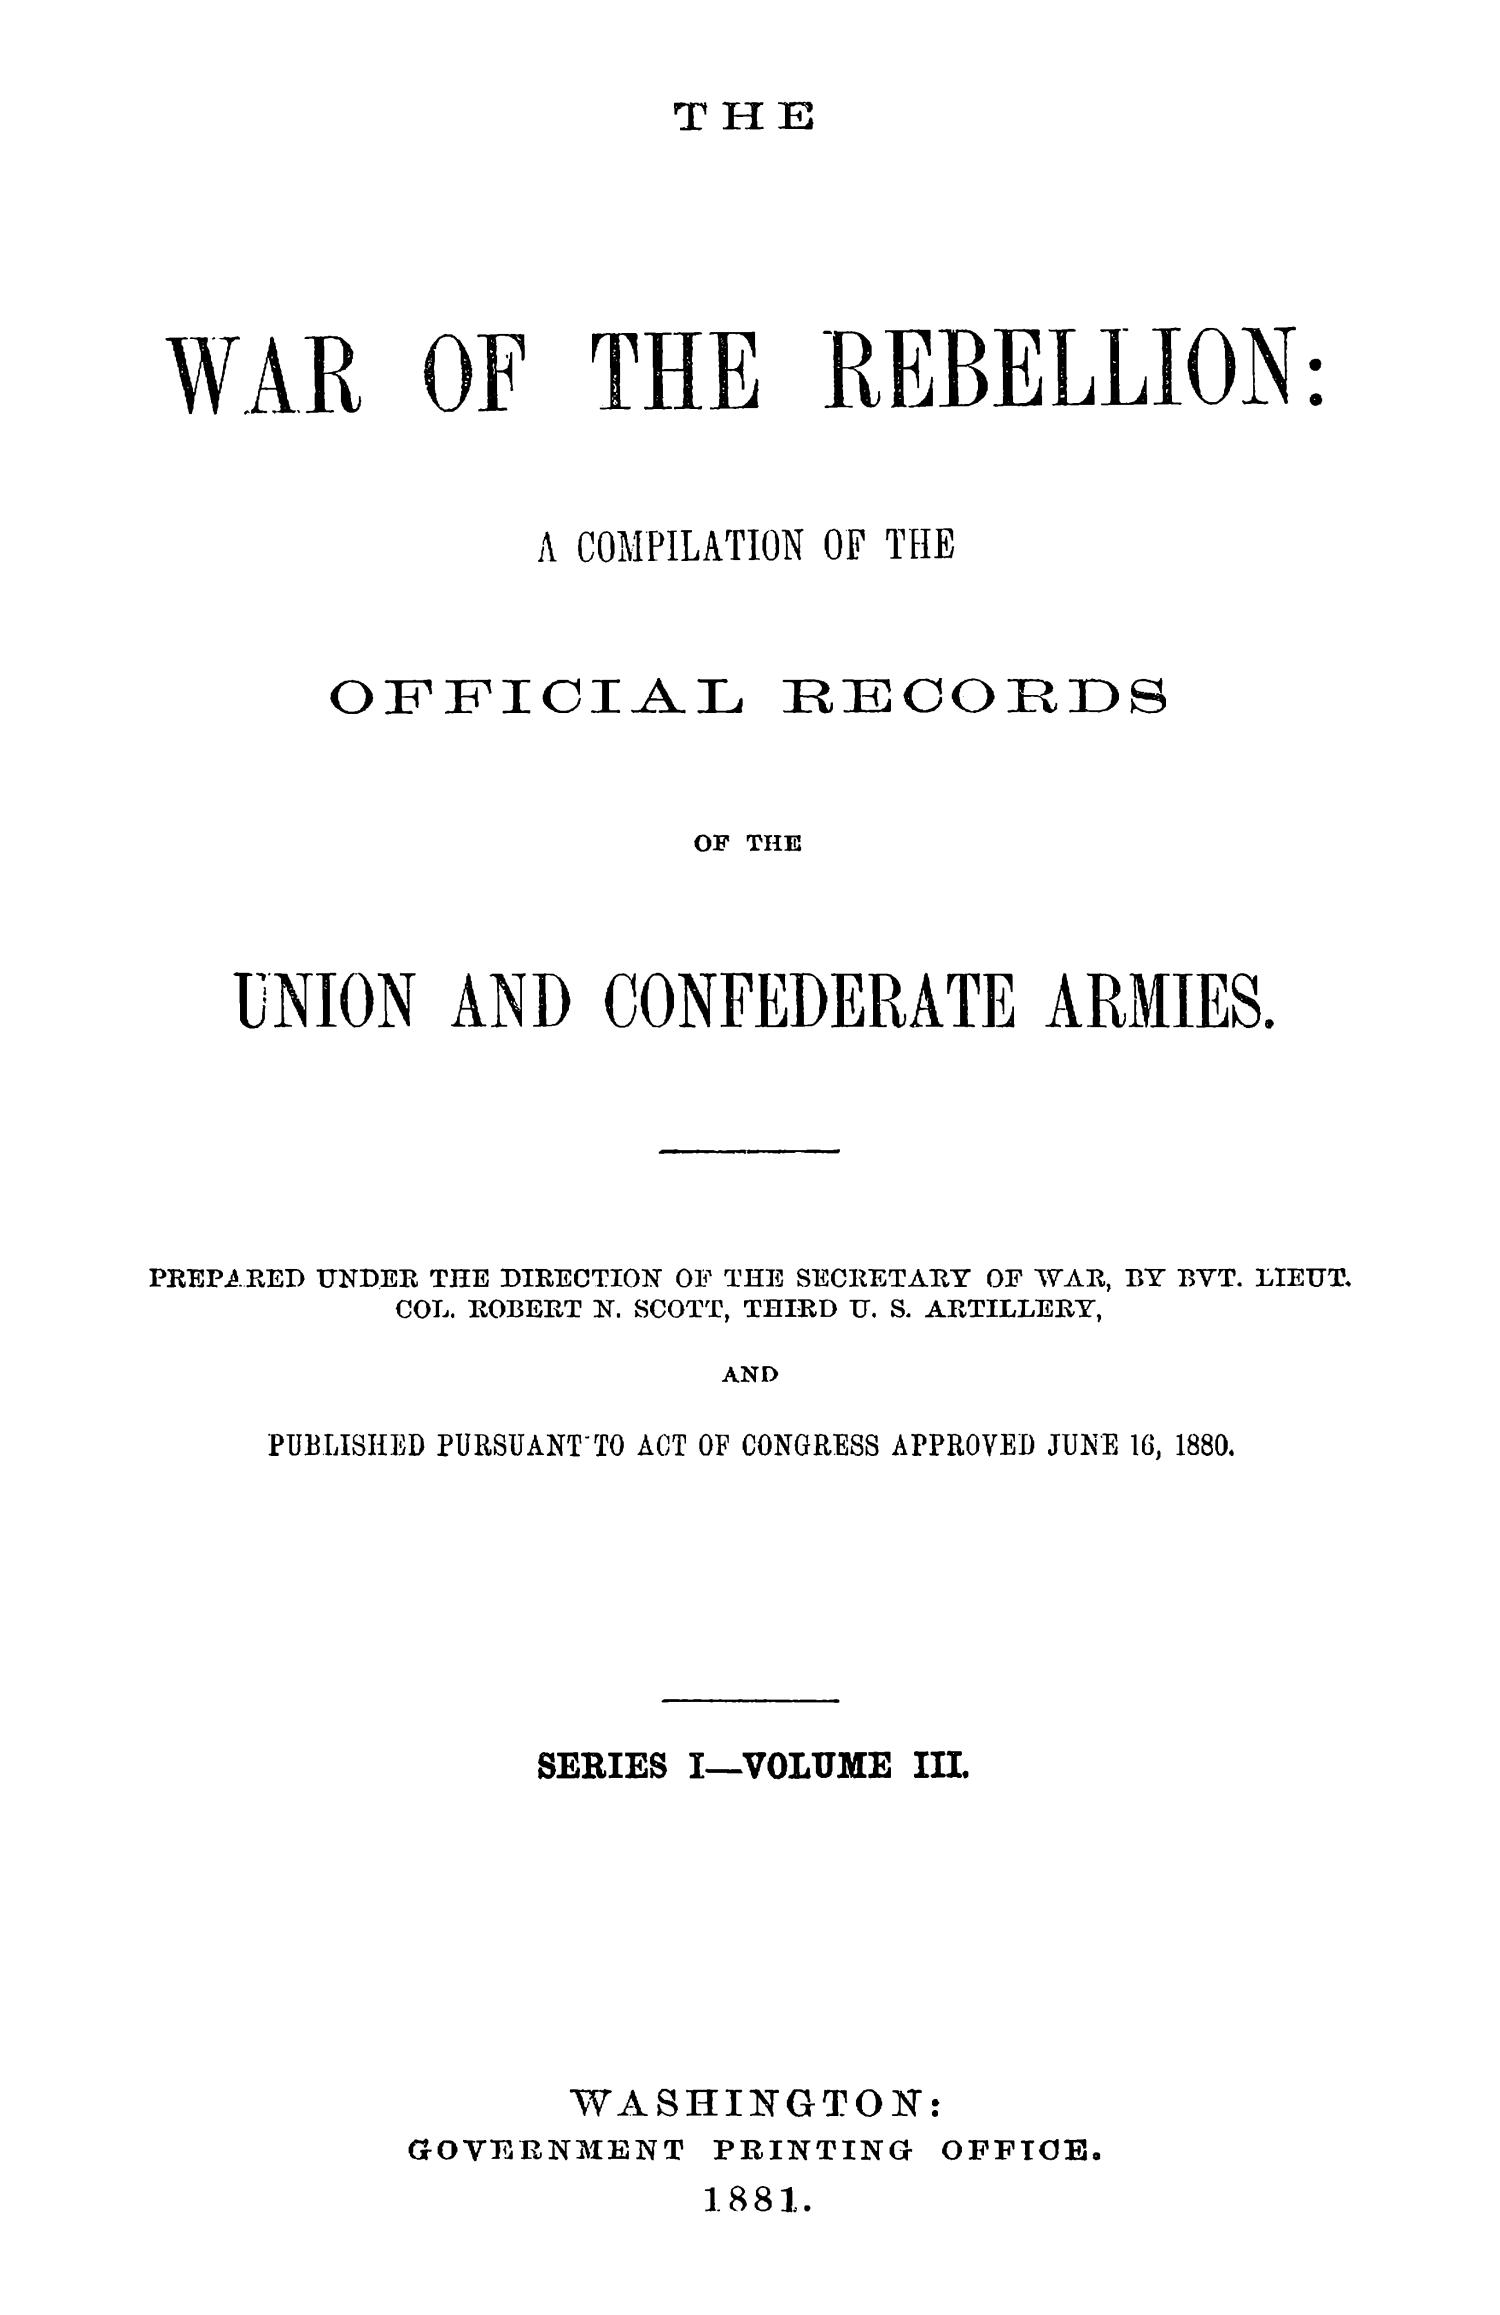 The War of the Rebellion: A Compilation of the Official Records of the Union And Confederate Armies. Series 1, Volume 3.
                                                
                                                    Title Page
                                                